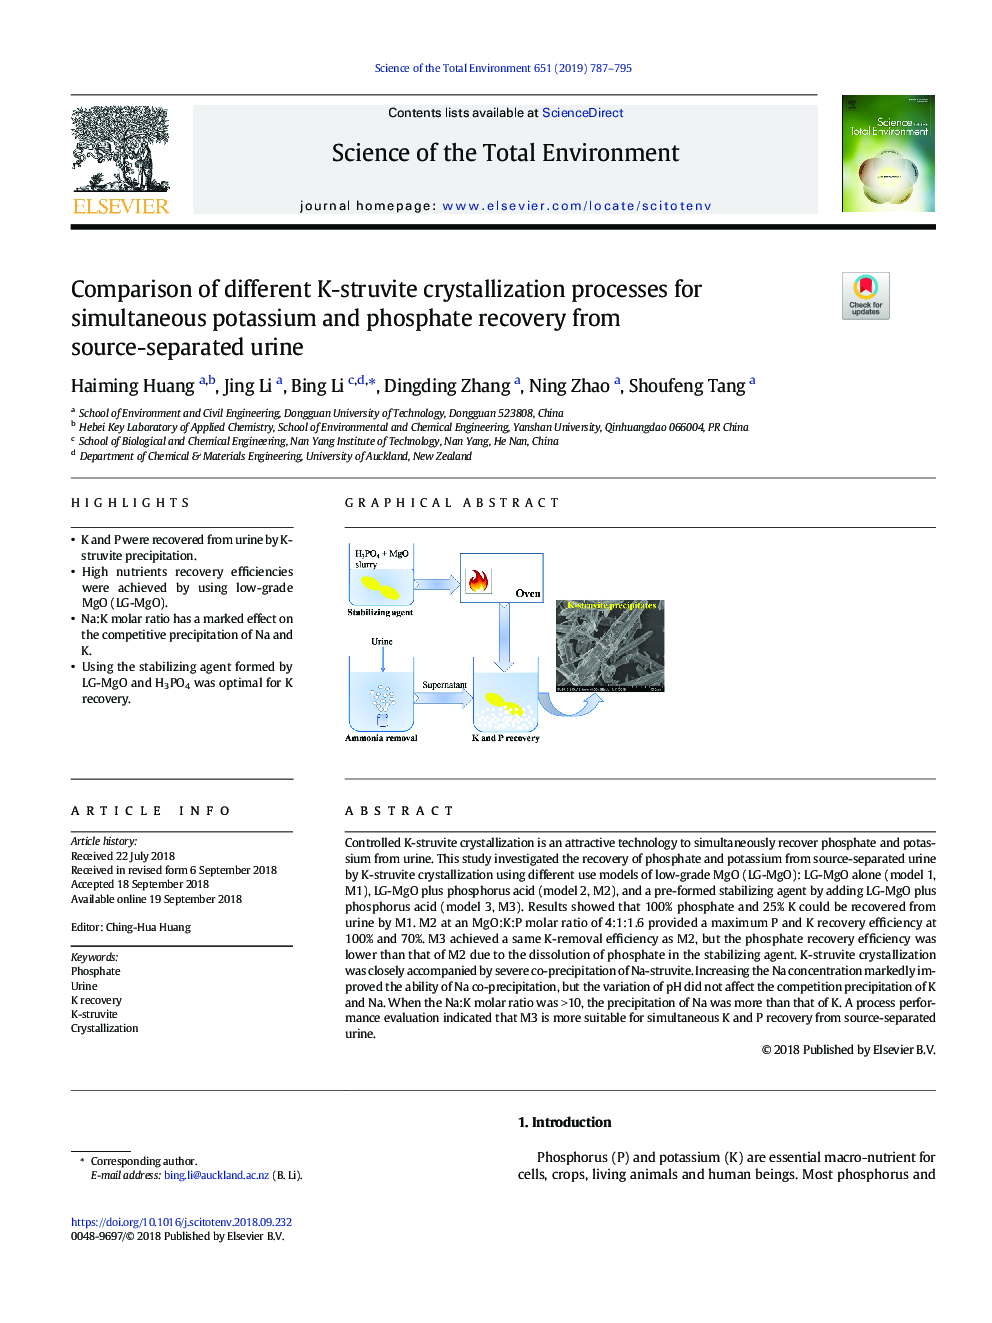 Comparison of different K-struvite crystallization processes for simultaneous potassium and phosphate recovery from source-separated urine